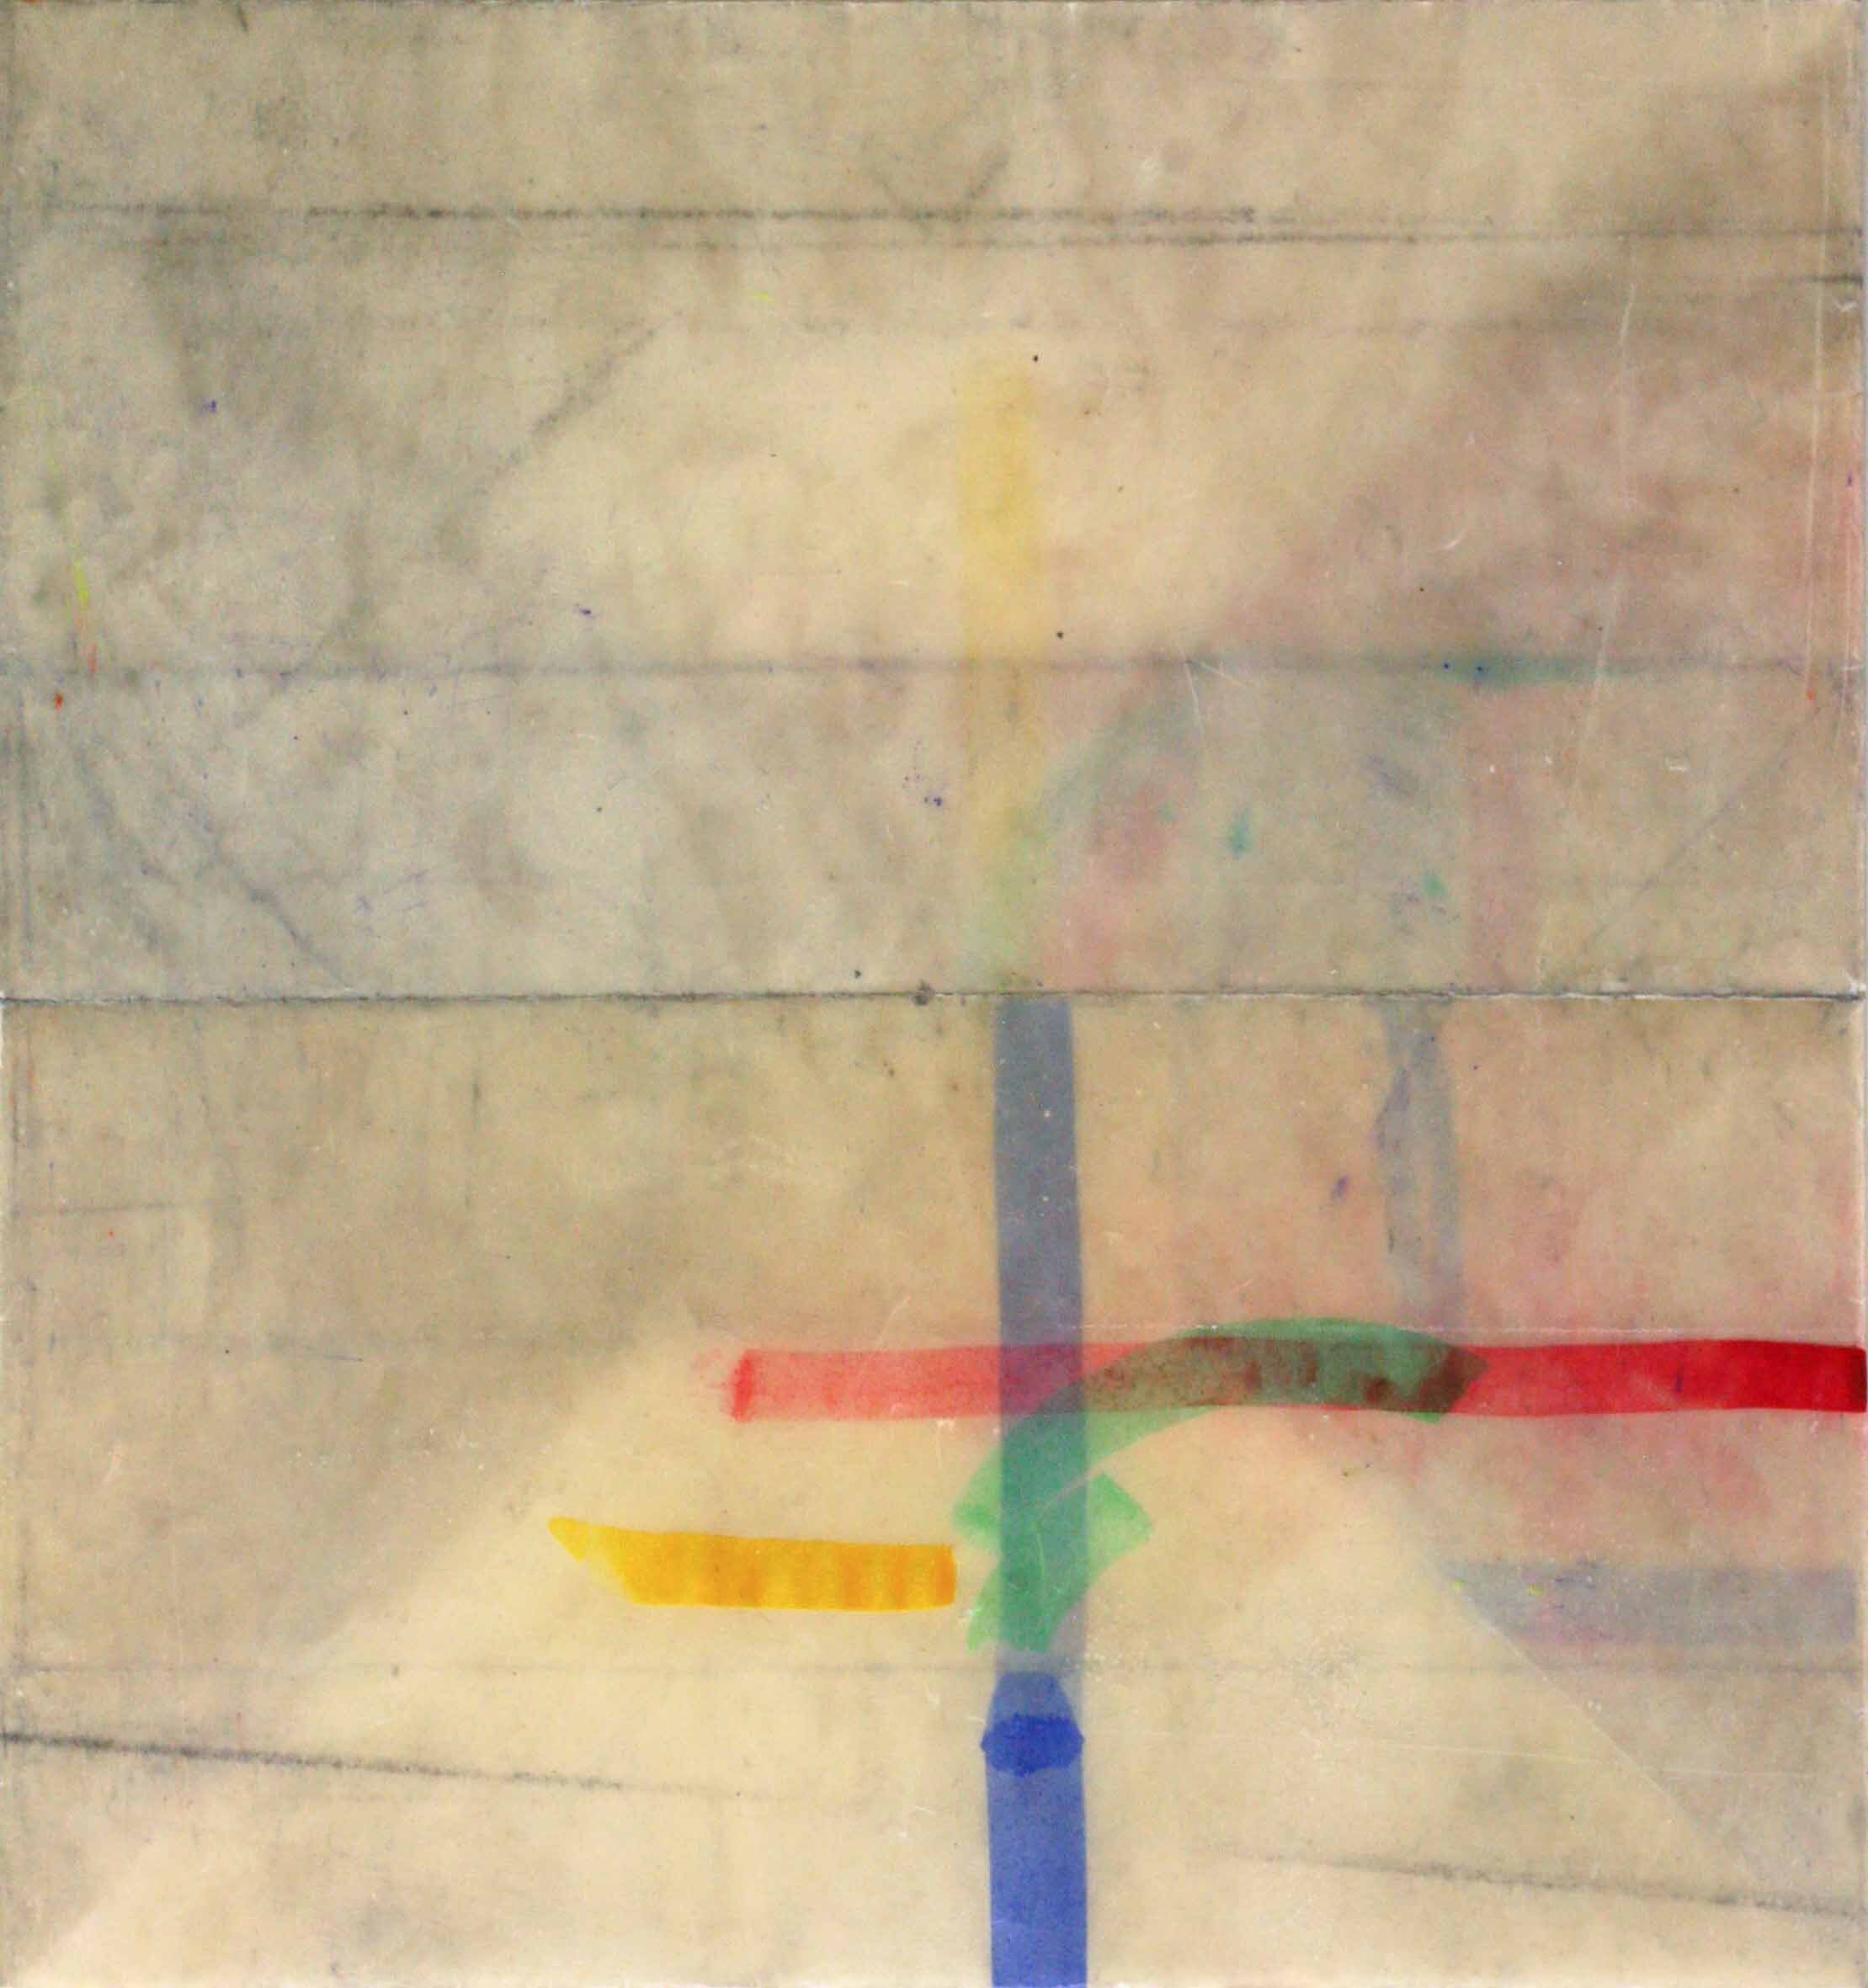  “Udo (3)”, 32 × 30 cm, Aquarell and Wax on Paper, 2013 